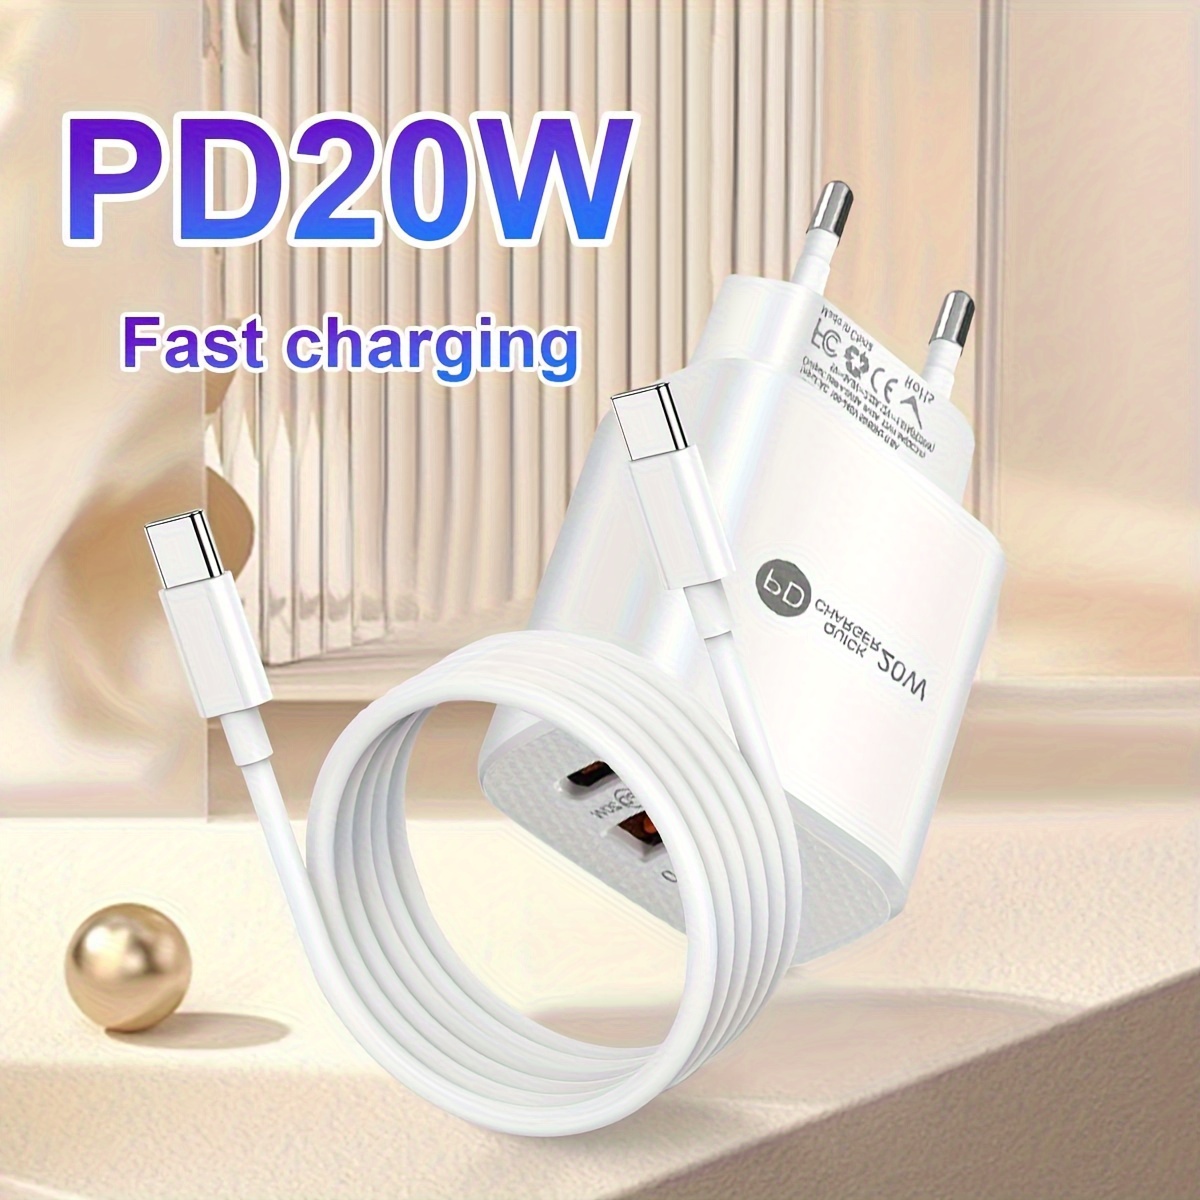 

Fast Charging Wall Charger With Usb Type-c Connector, 20w Pd Power Adapter For Travel, European Standard Plug, Compatible With 15/samsung Galaxy S23/s22/s21/s20 Series & More